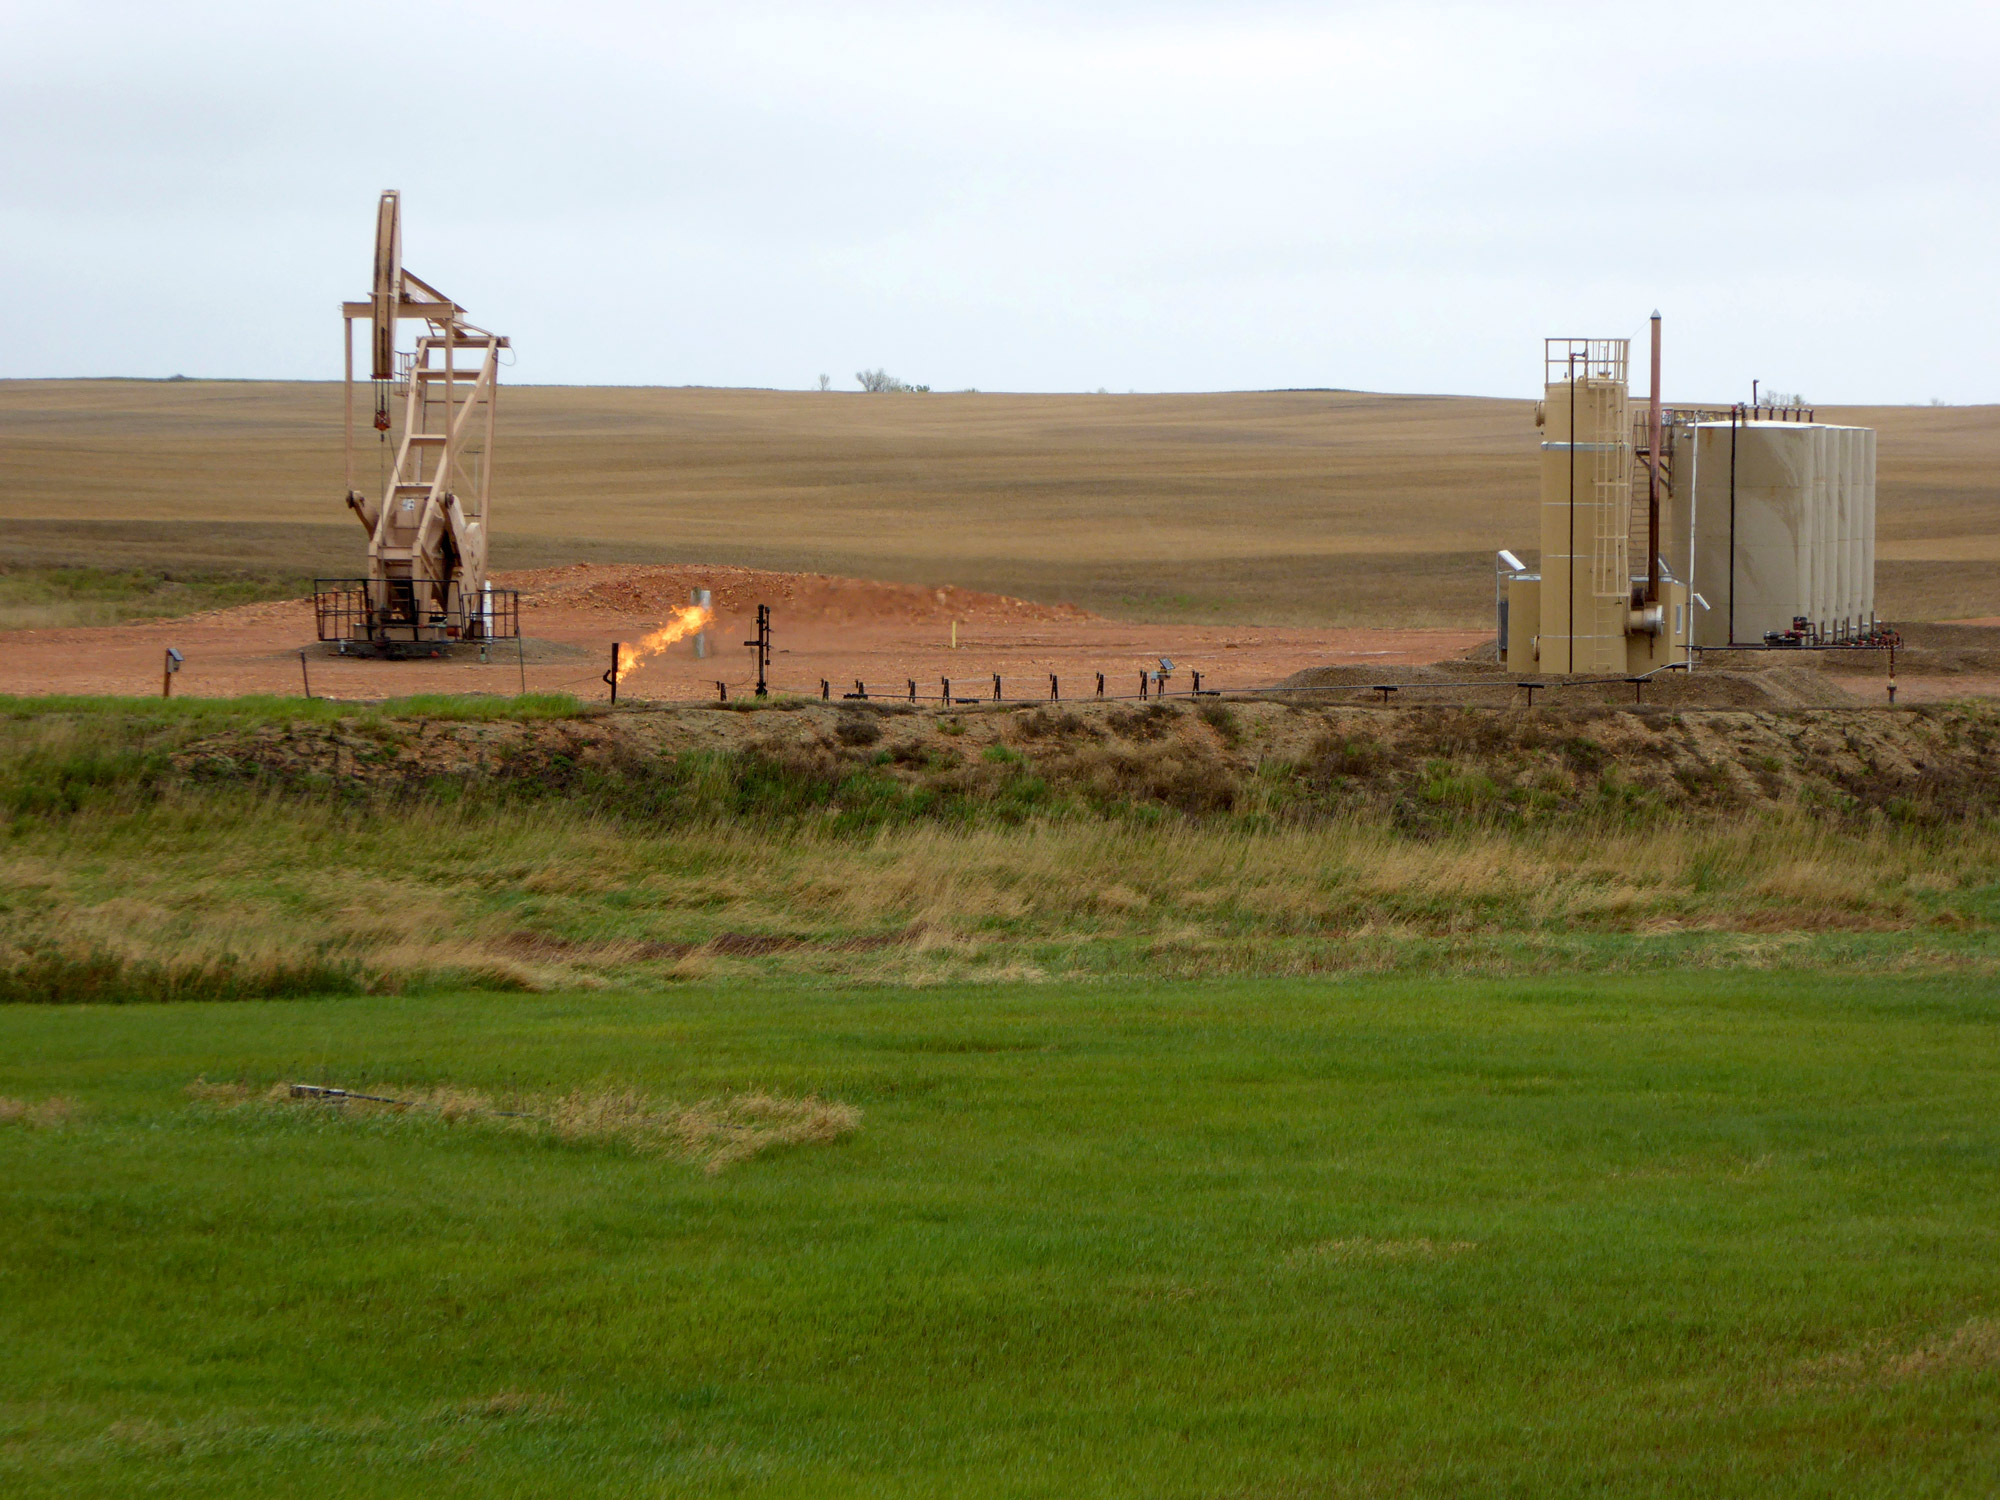  Excess natural gas is flared at a well pad in McKenzie County, ND 